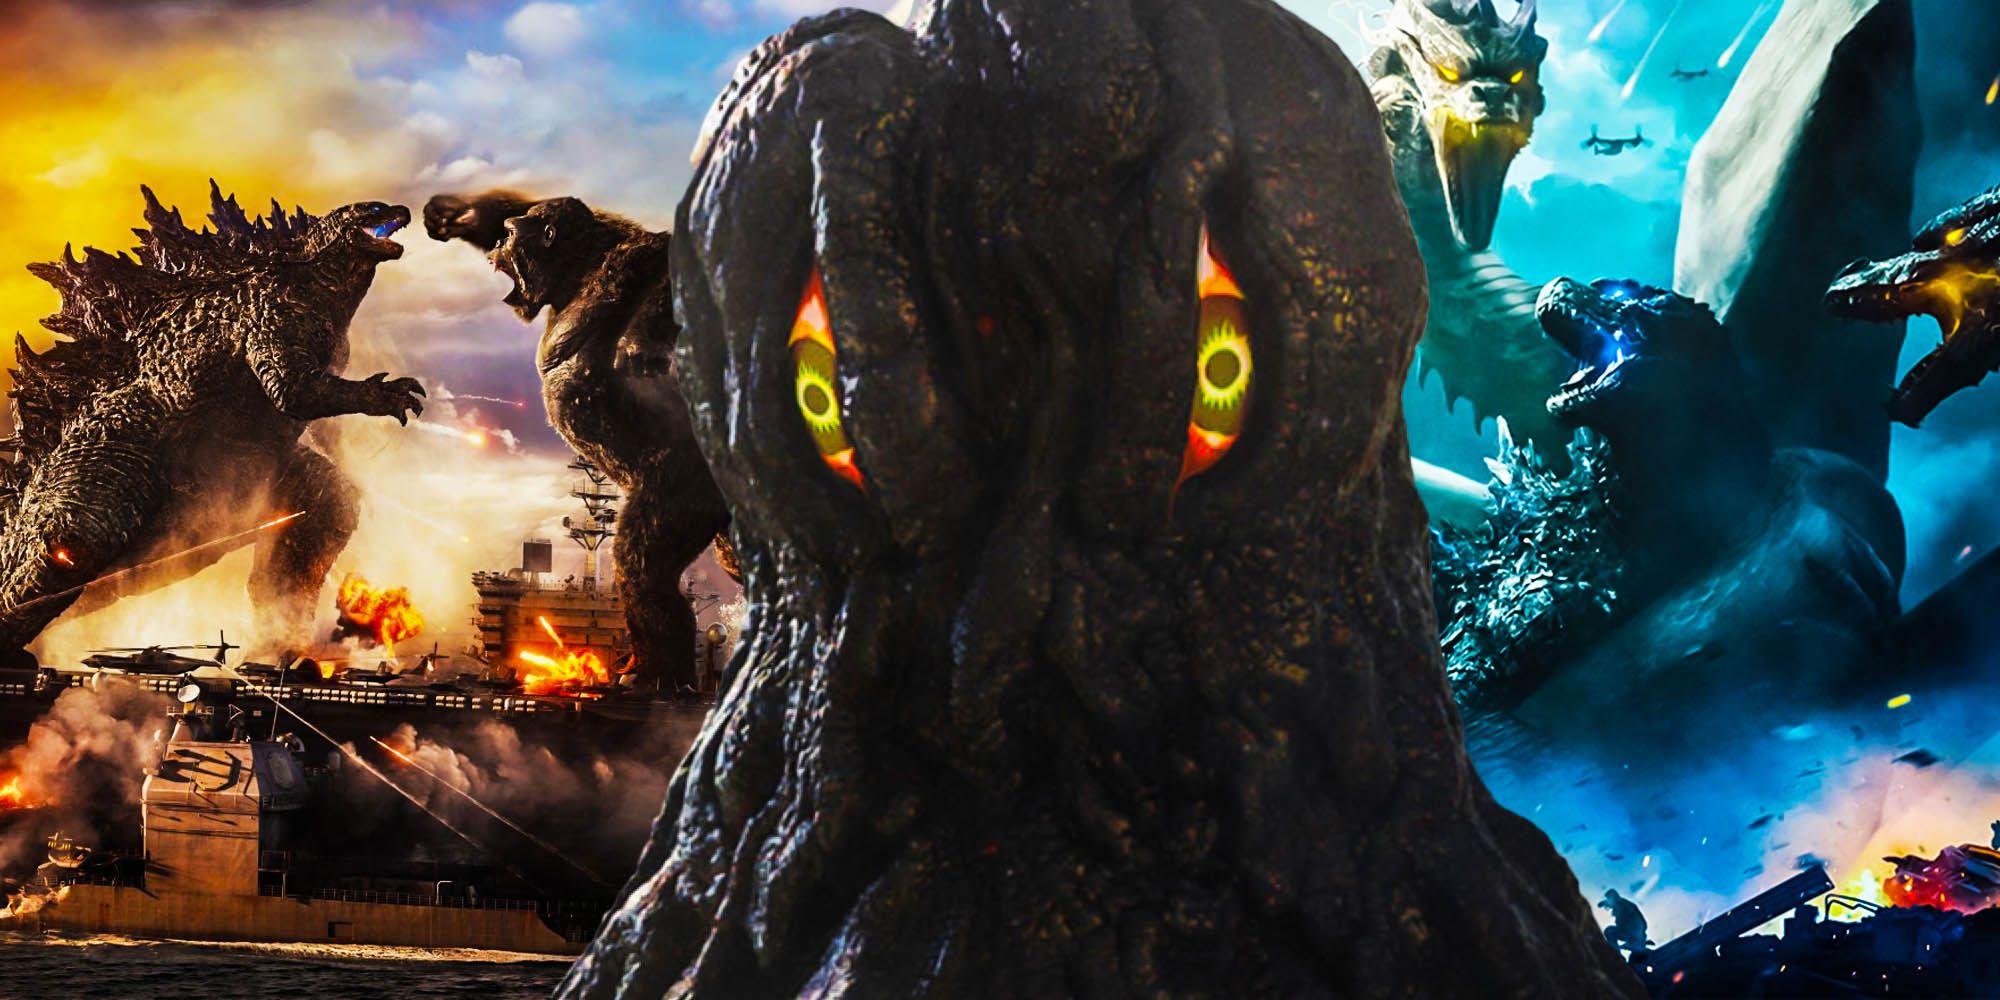 Hedorah best kong 2 villain can continue King of the monsters and Godzilla vs kong stories